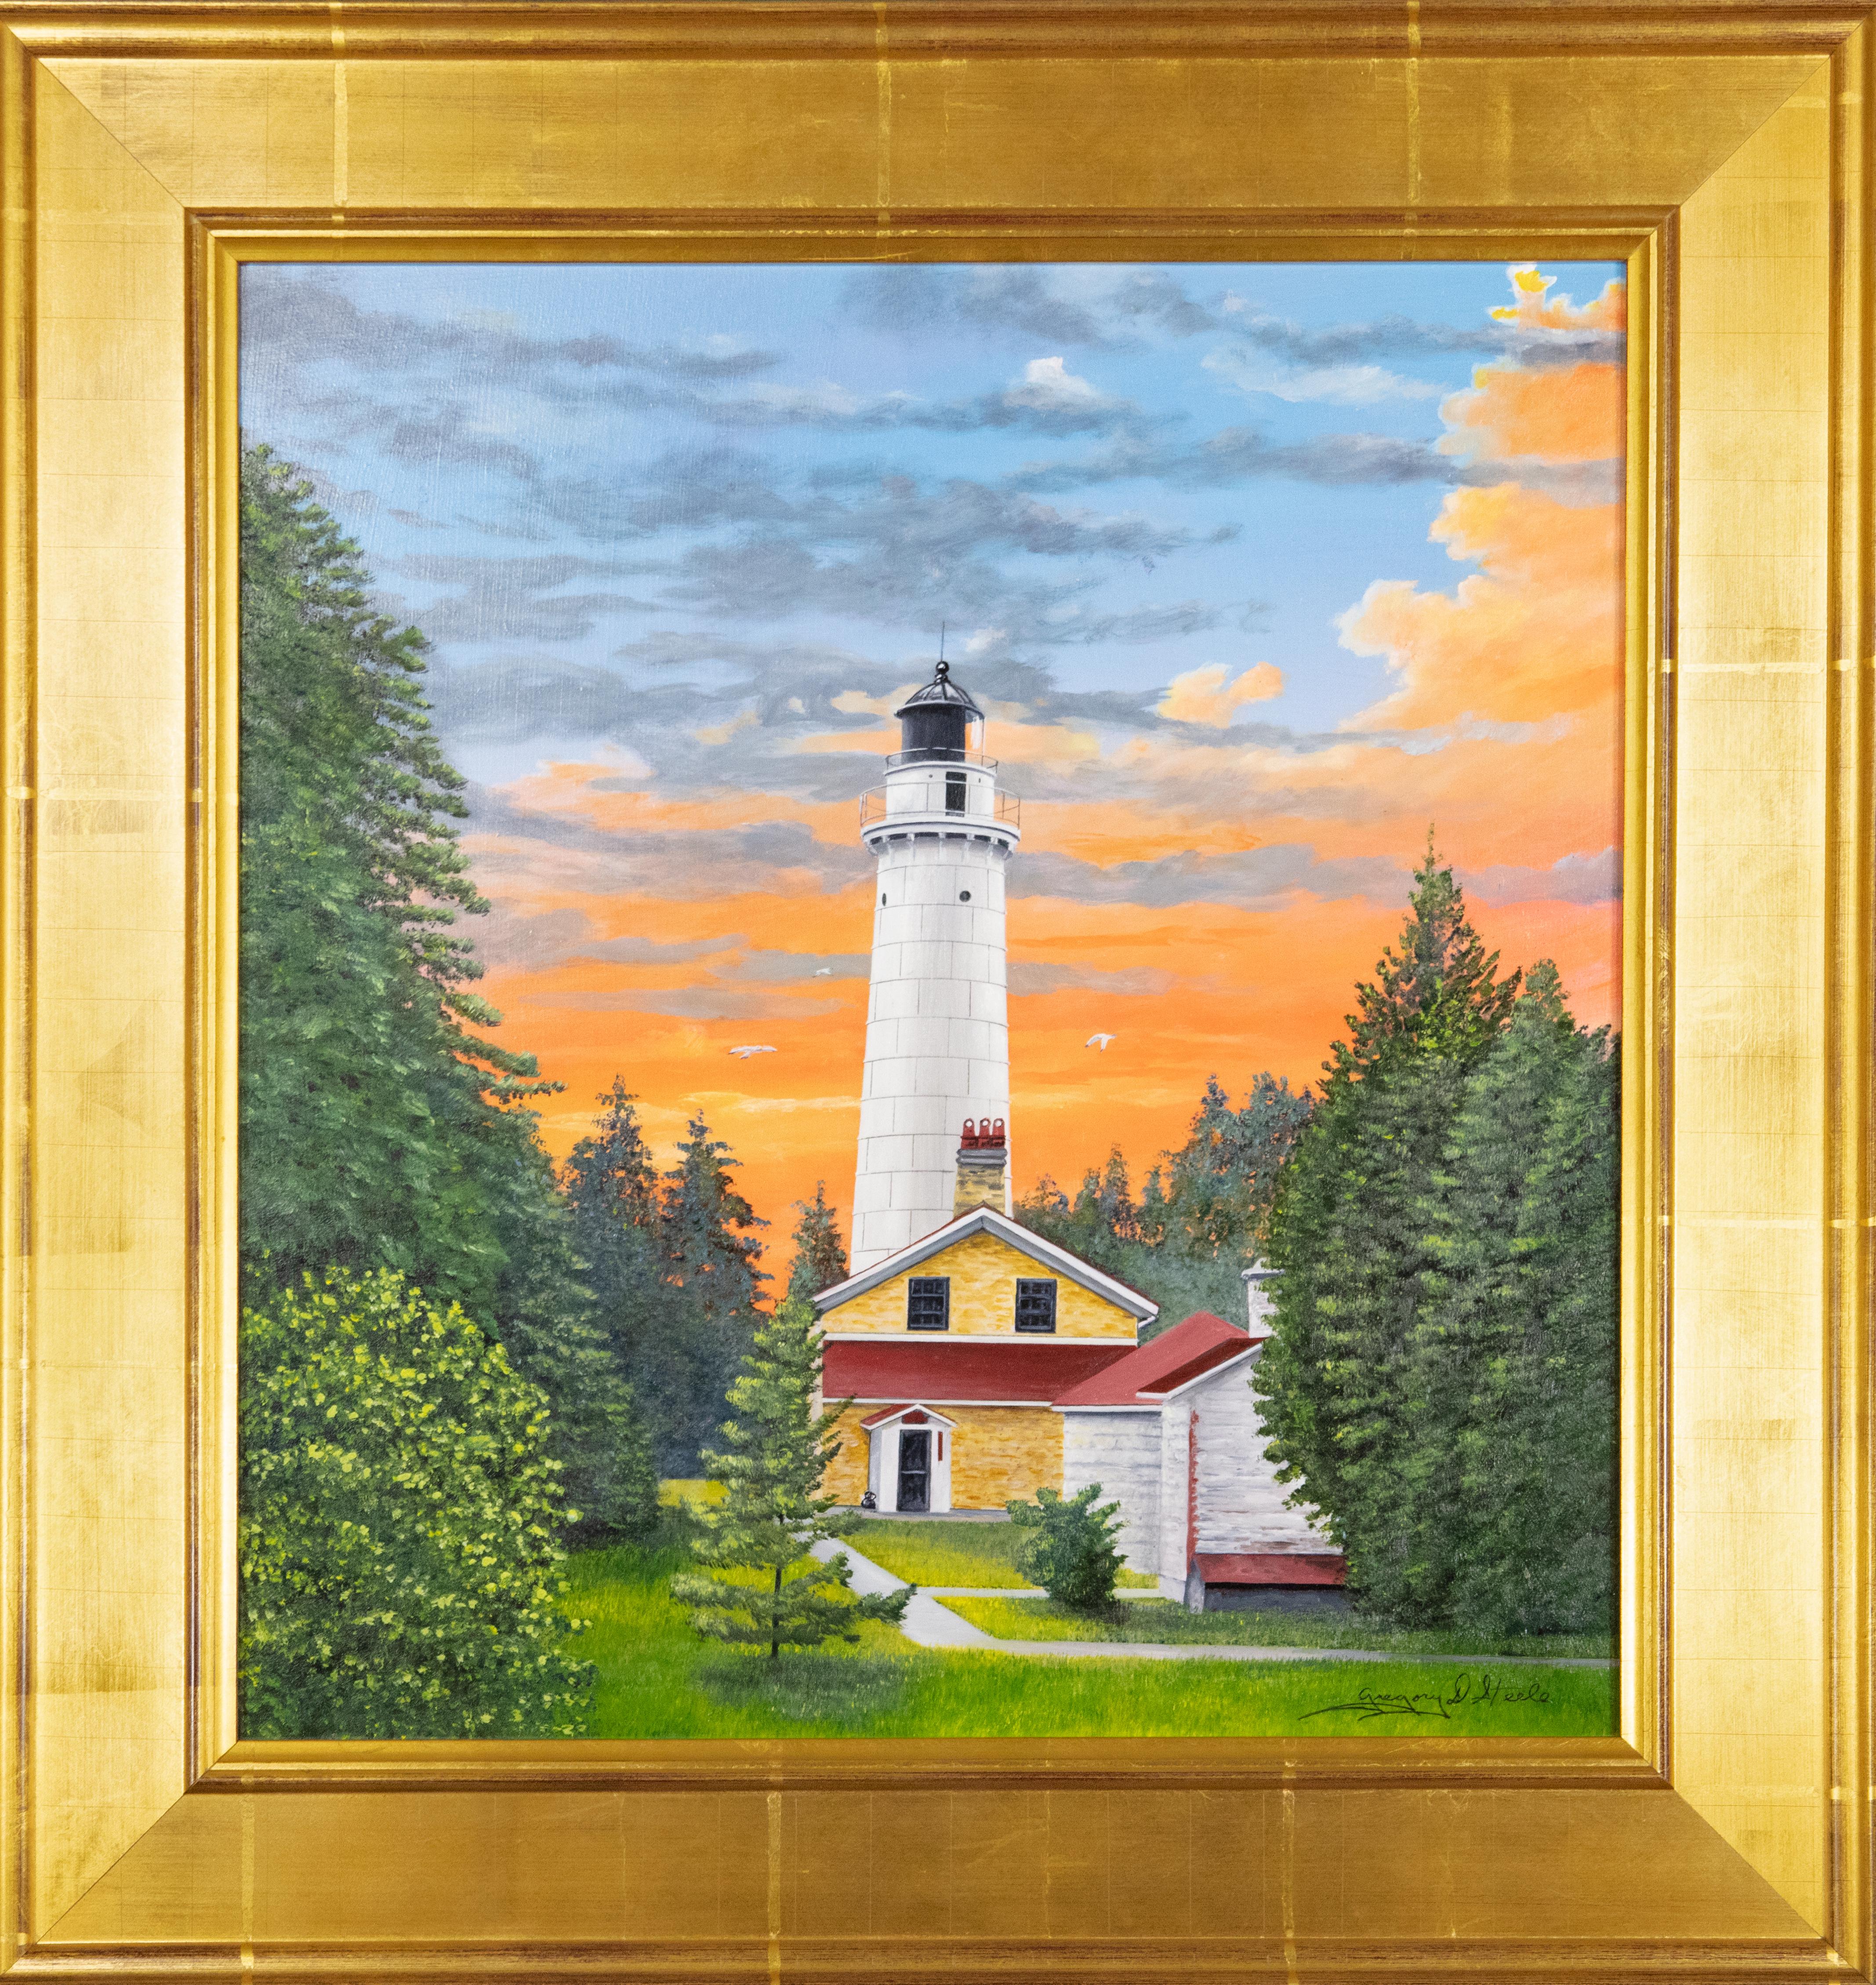 Gregory D. Steele Landscape Painting - 'Door County Lighthouse, Cana Island' Original Oil Painting Signed by Artist